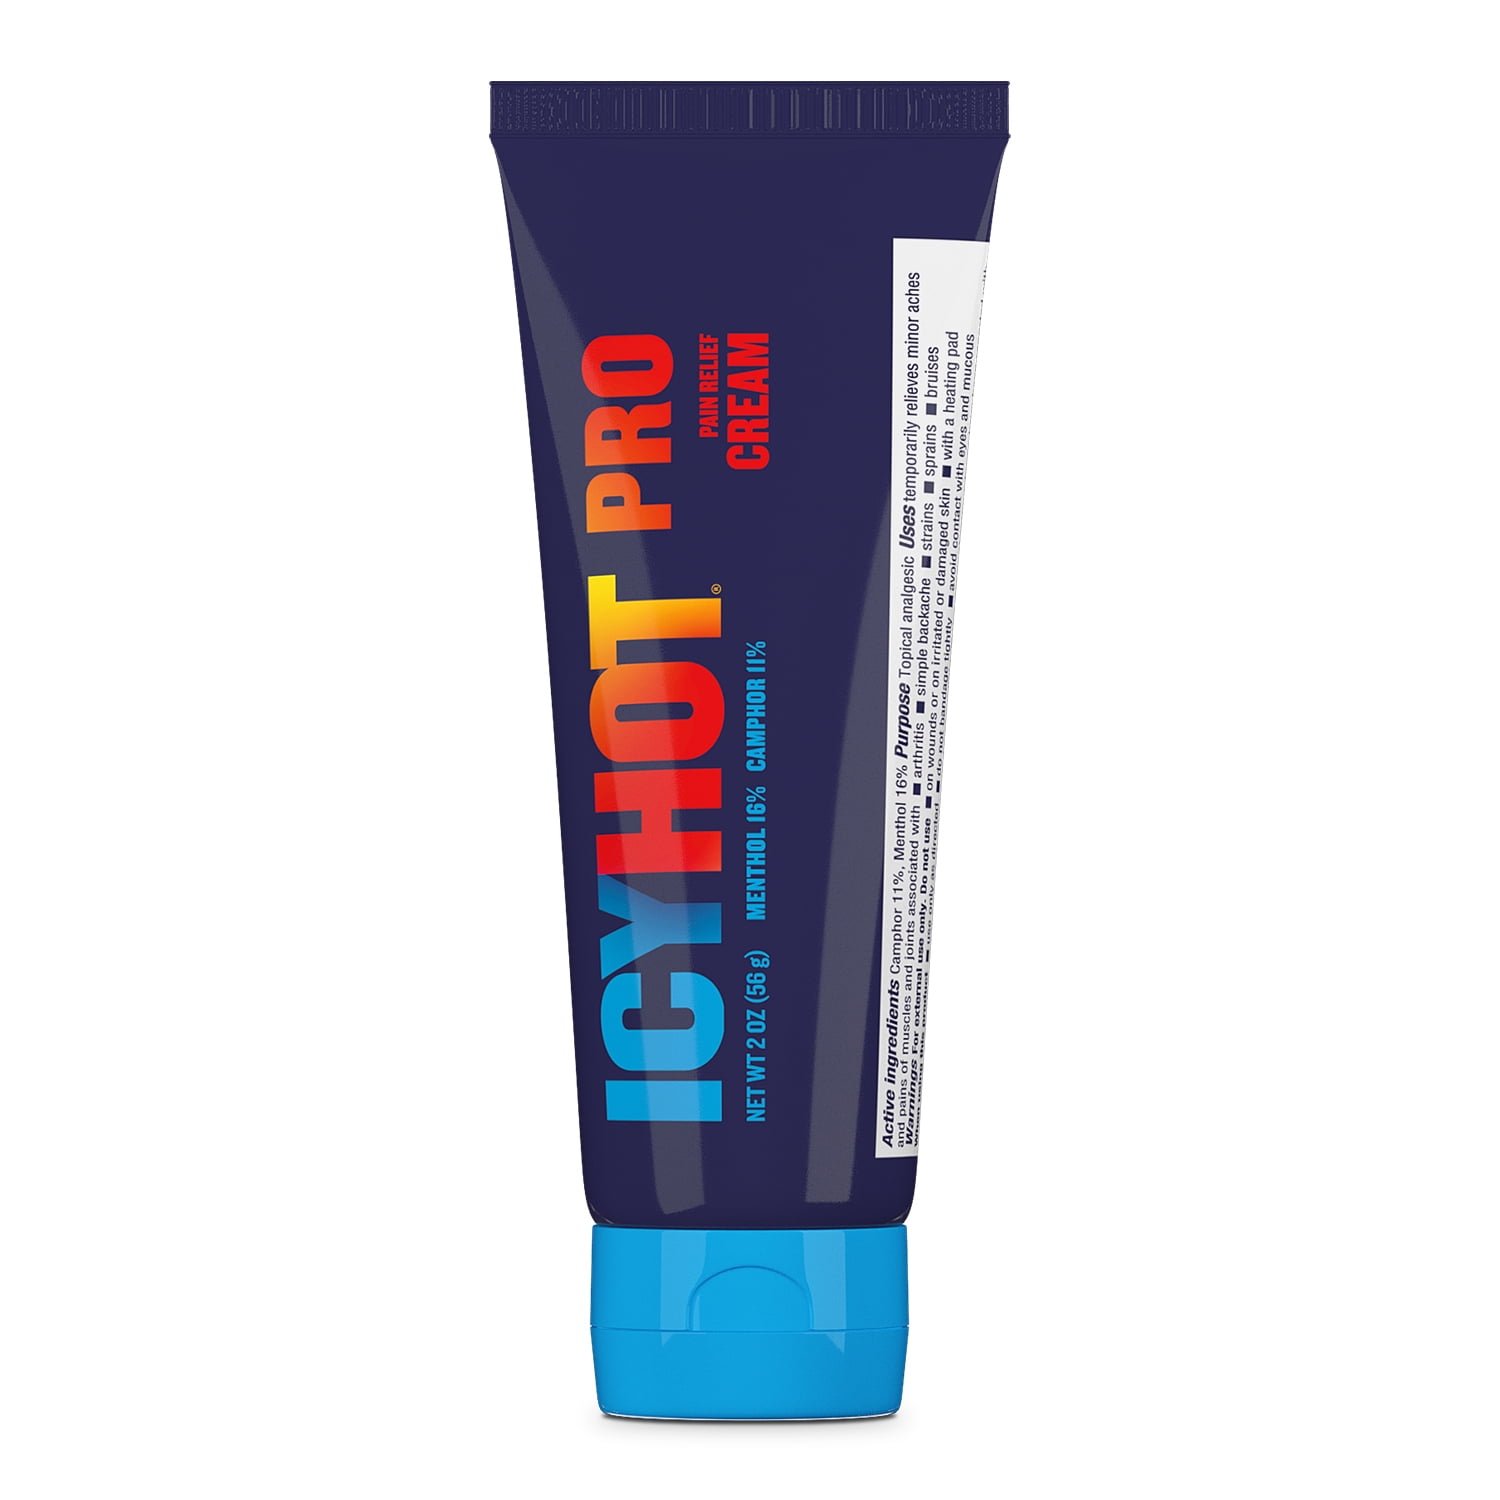 Icy Hot Pro Pain Relief Cream With Menthol & Camphor 2 oz Tube